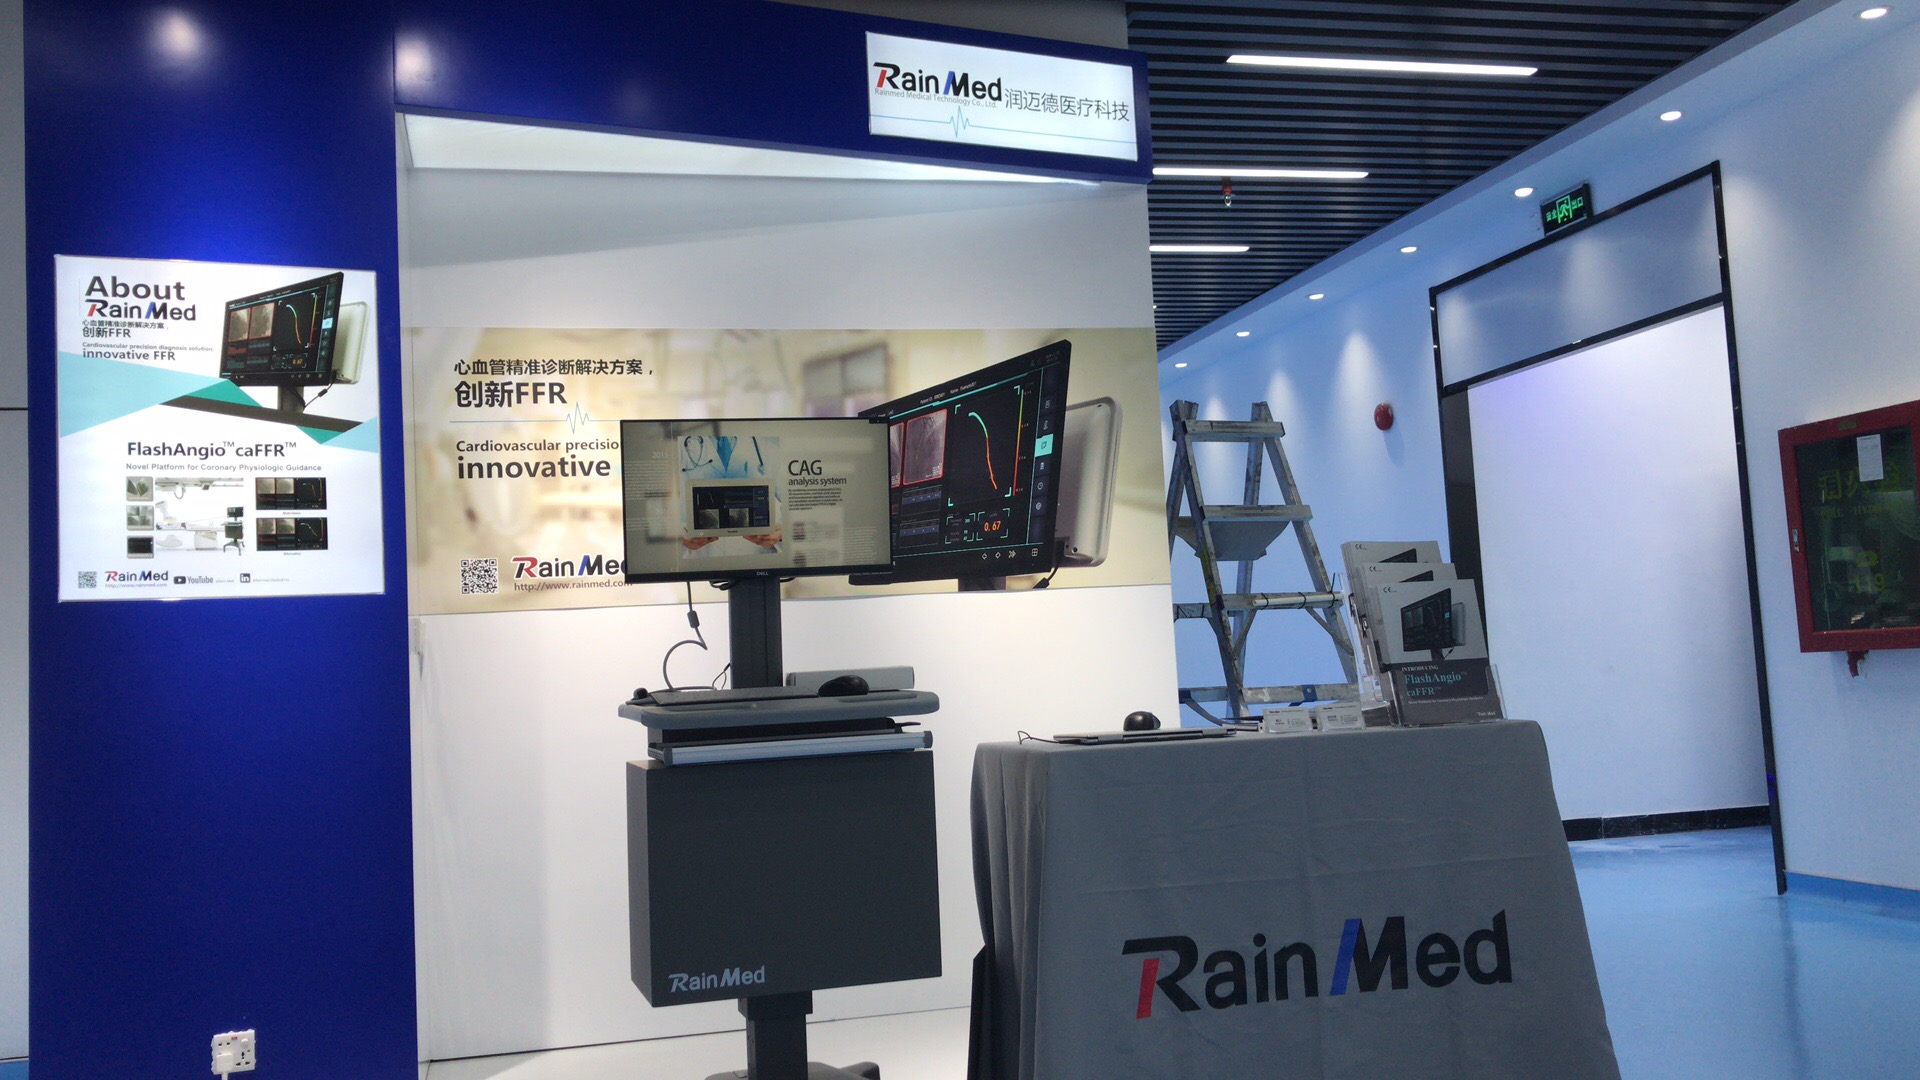 On November 18th, RainMed was unveiled at Umedwings Exhibition in Shenzhen